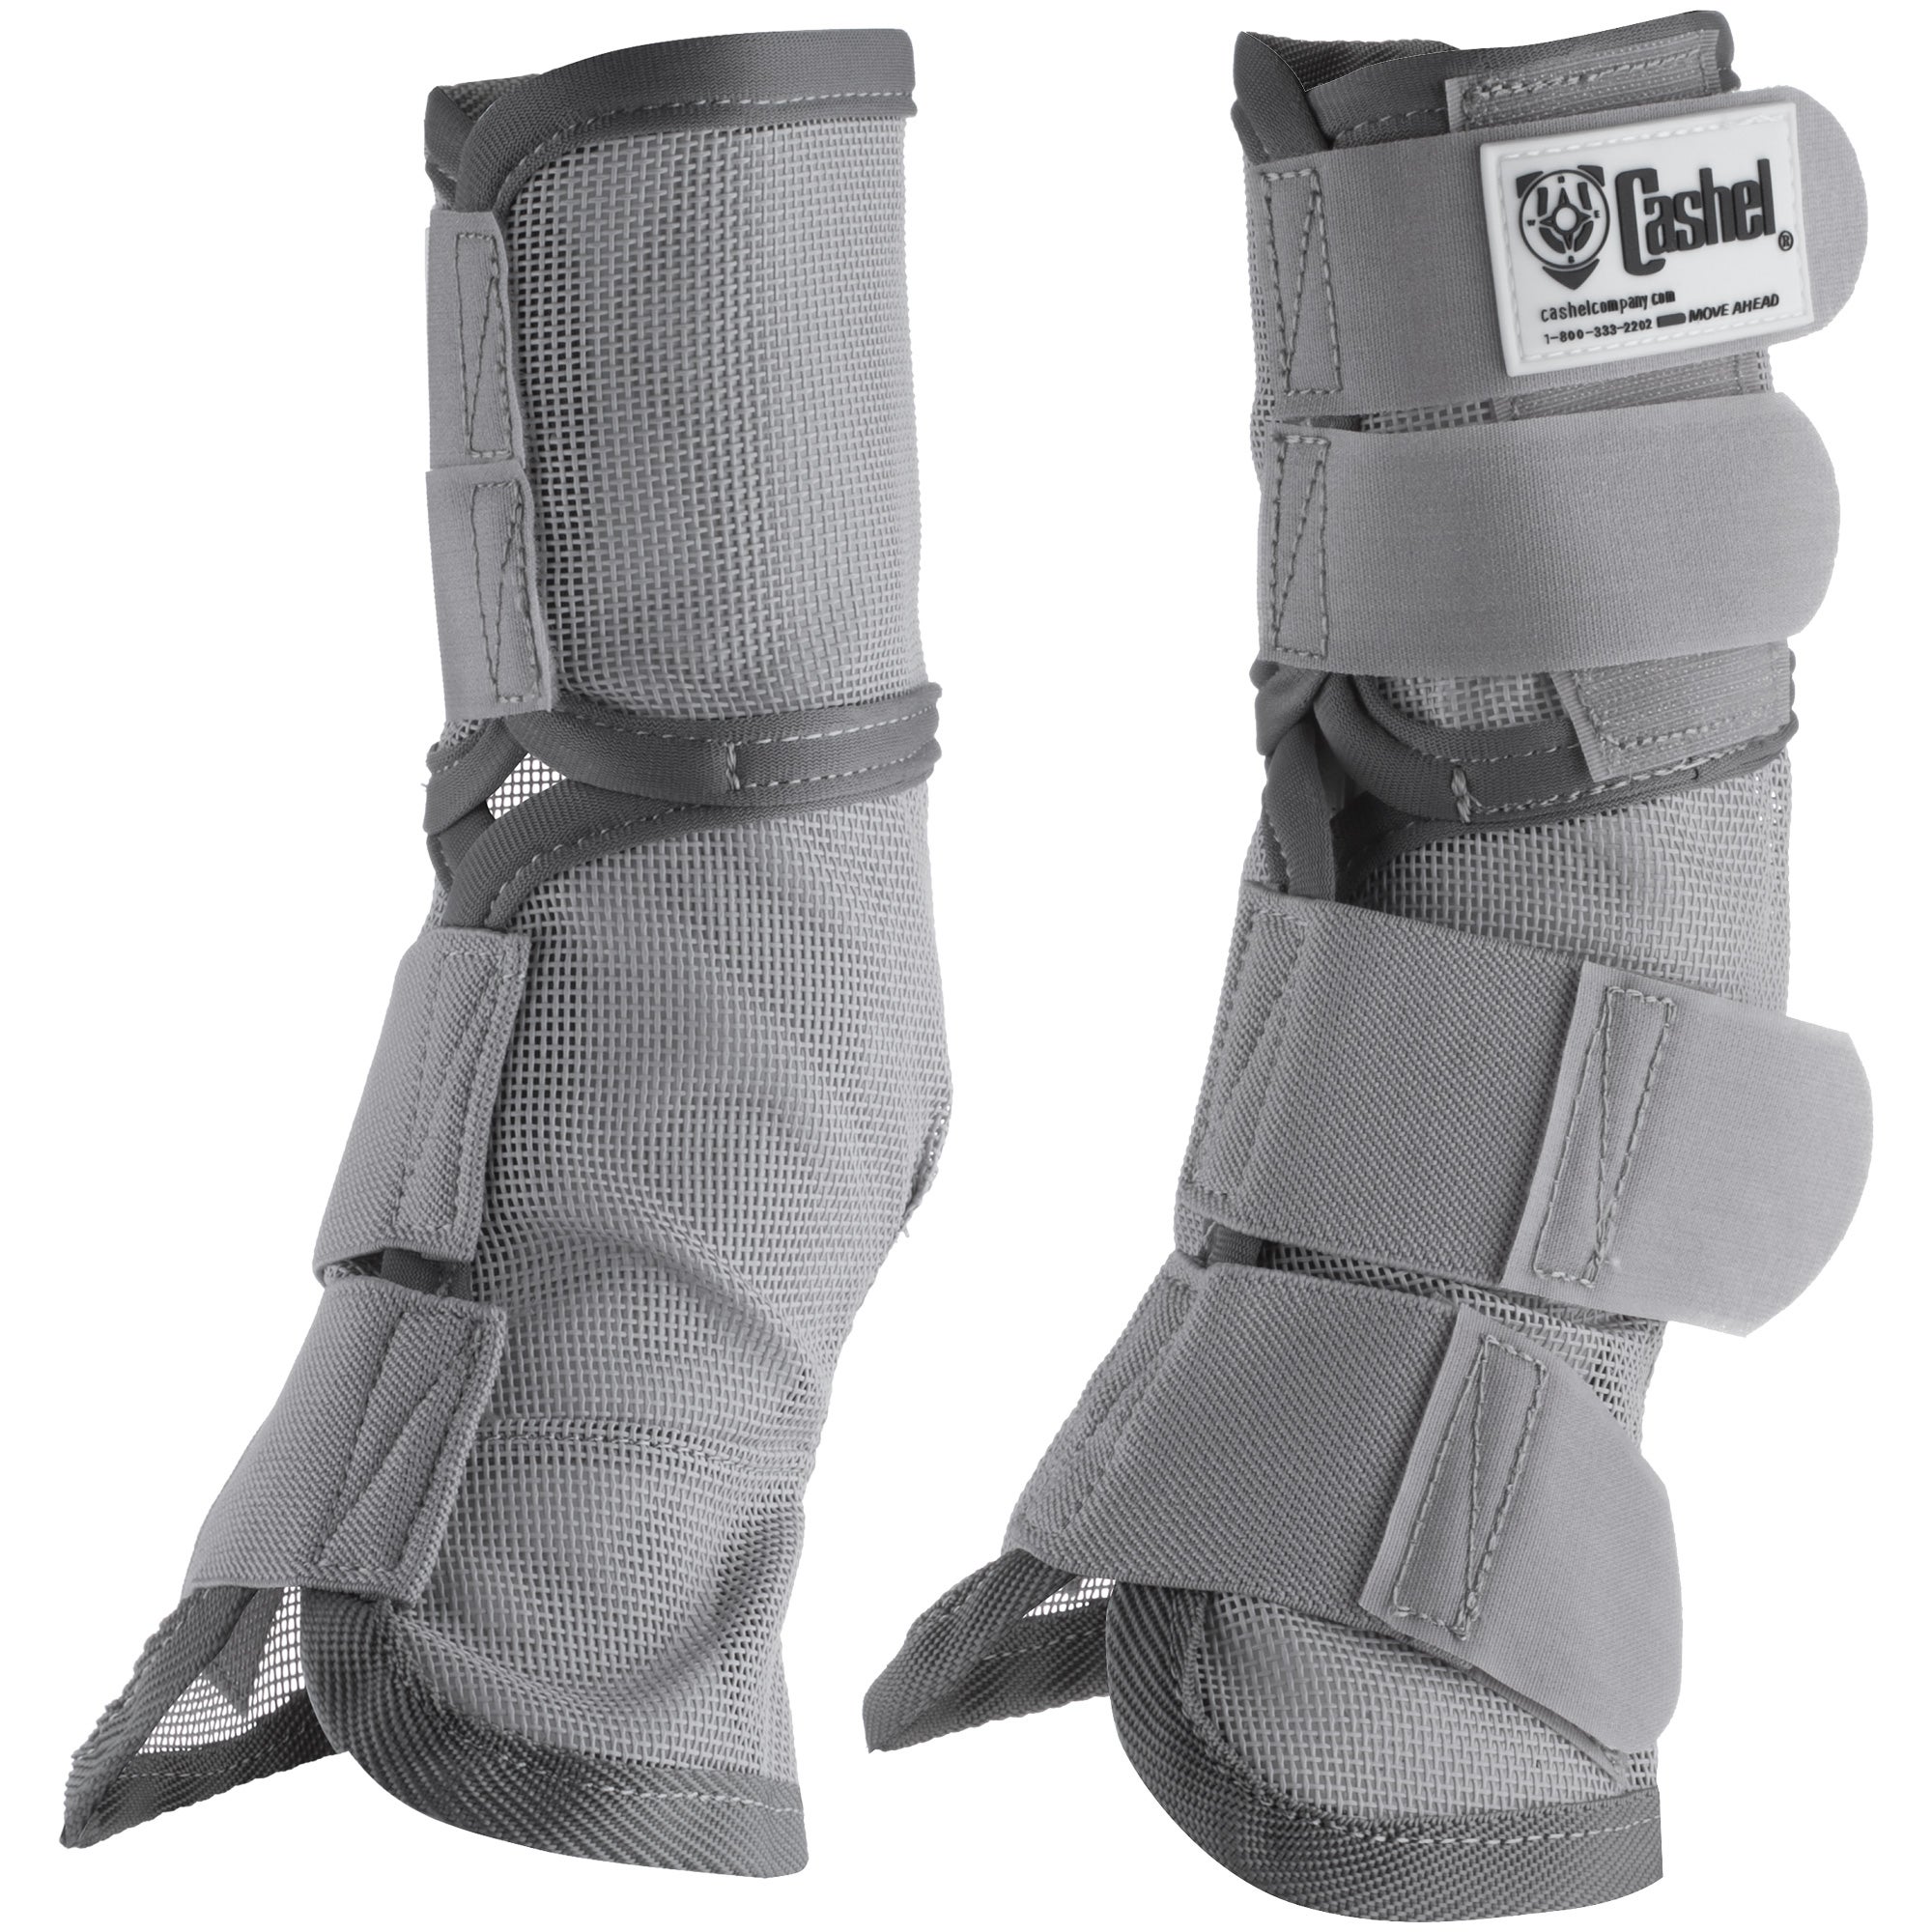 Cashel Fly Prevention Small Pony Horse Leg Guard Cool Mesh Boots Grey U-G3SP 